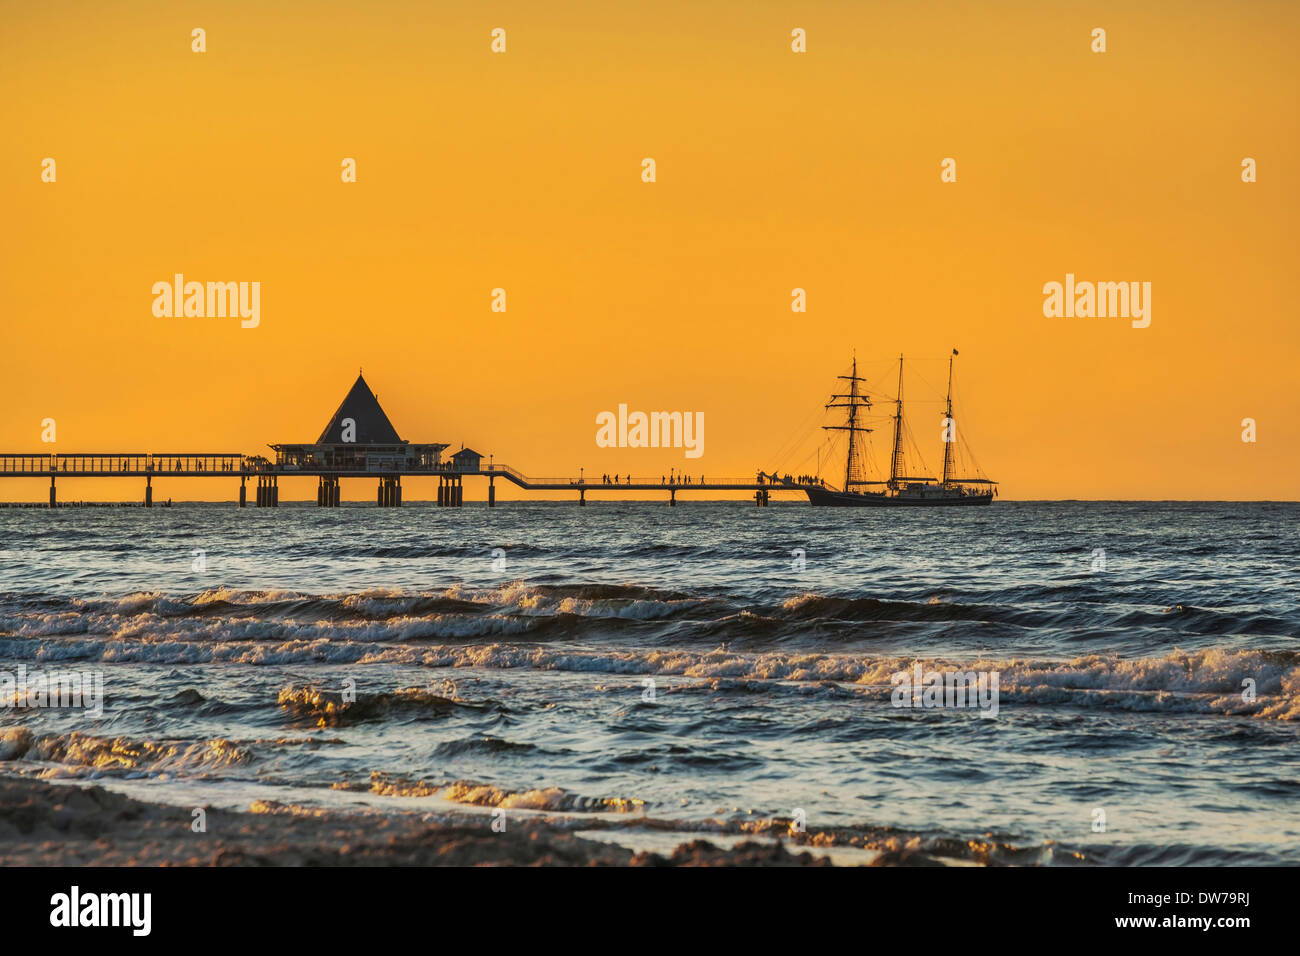 A sailing ship lands at evening at the Heringsdorf Pier, Island of Usedom, Mecklenburg-Western Pomerania, Germany, Europe Stock Photo